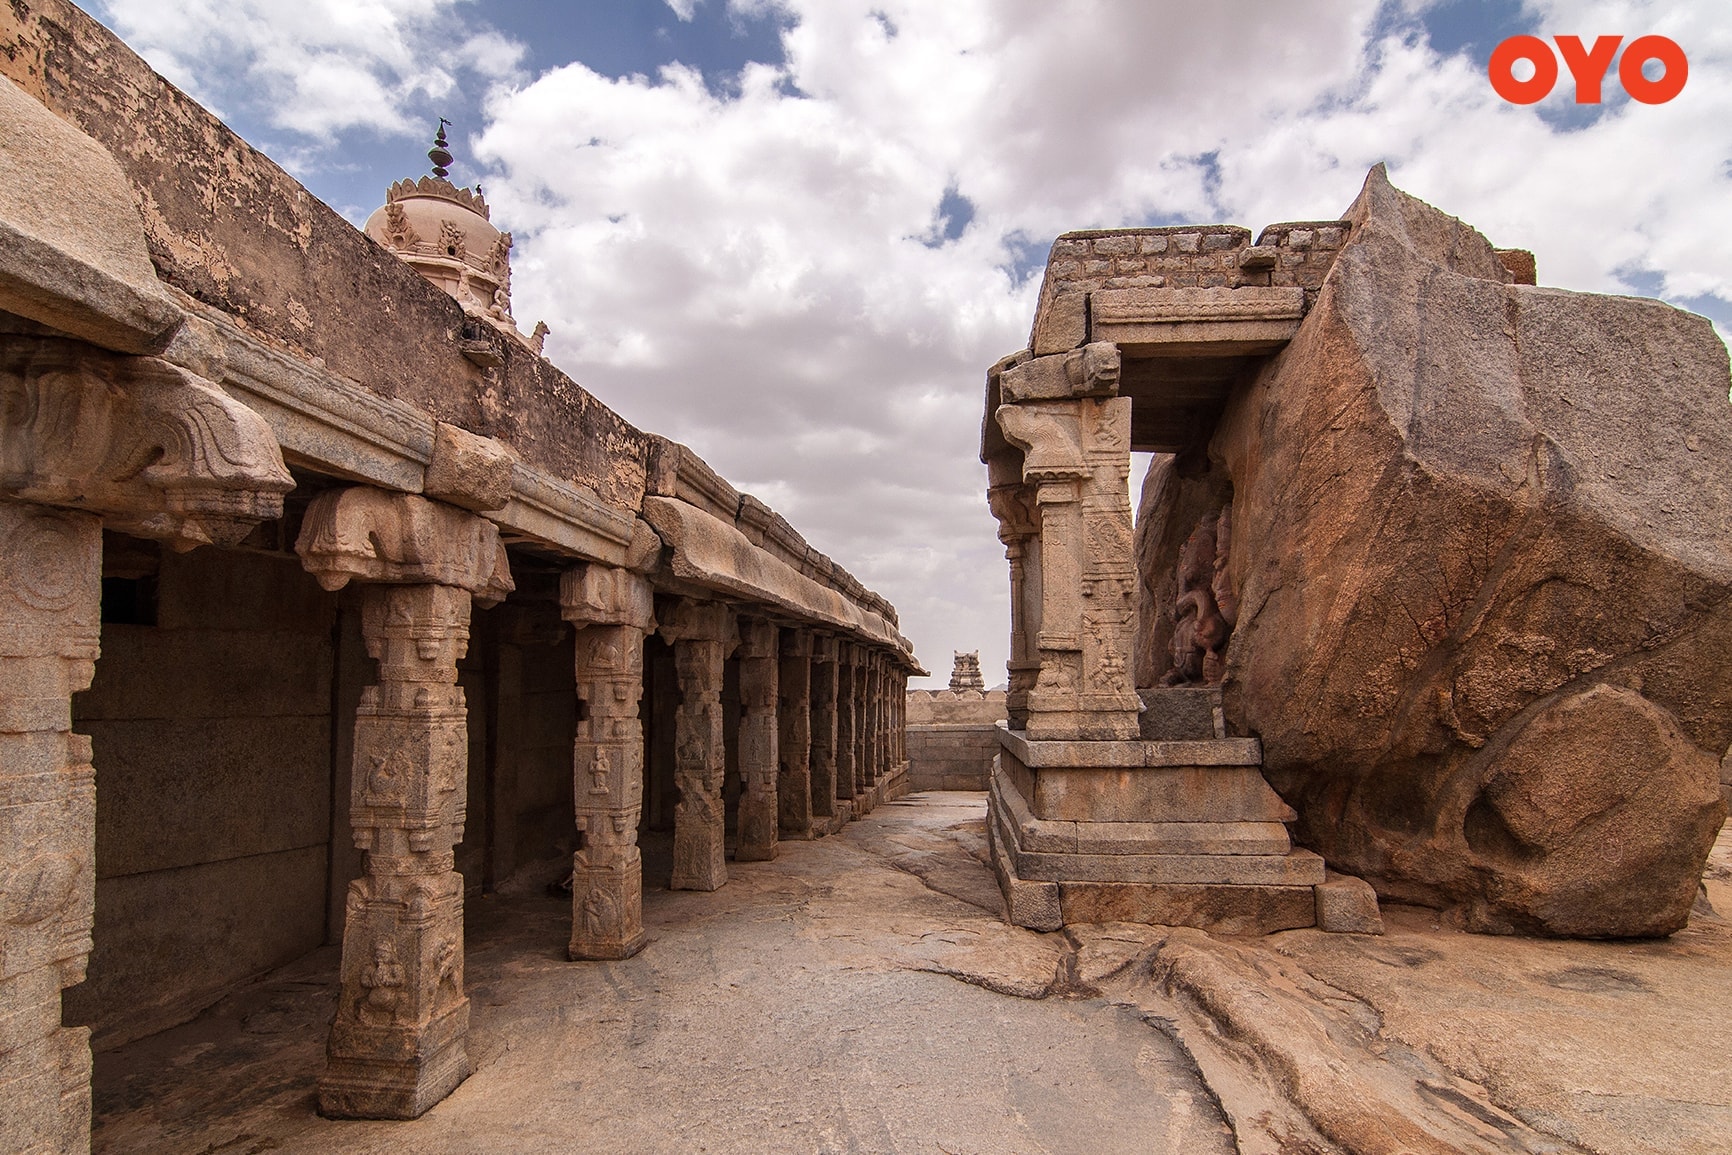 Lepakshi - one of the best tourist places near Bangalore within 300 kms